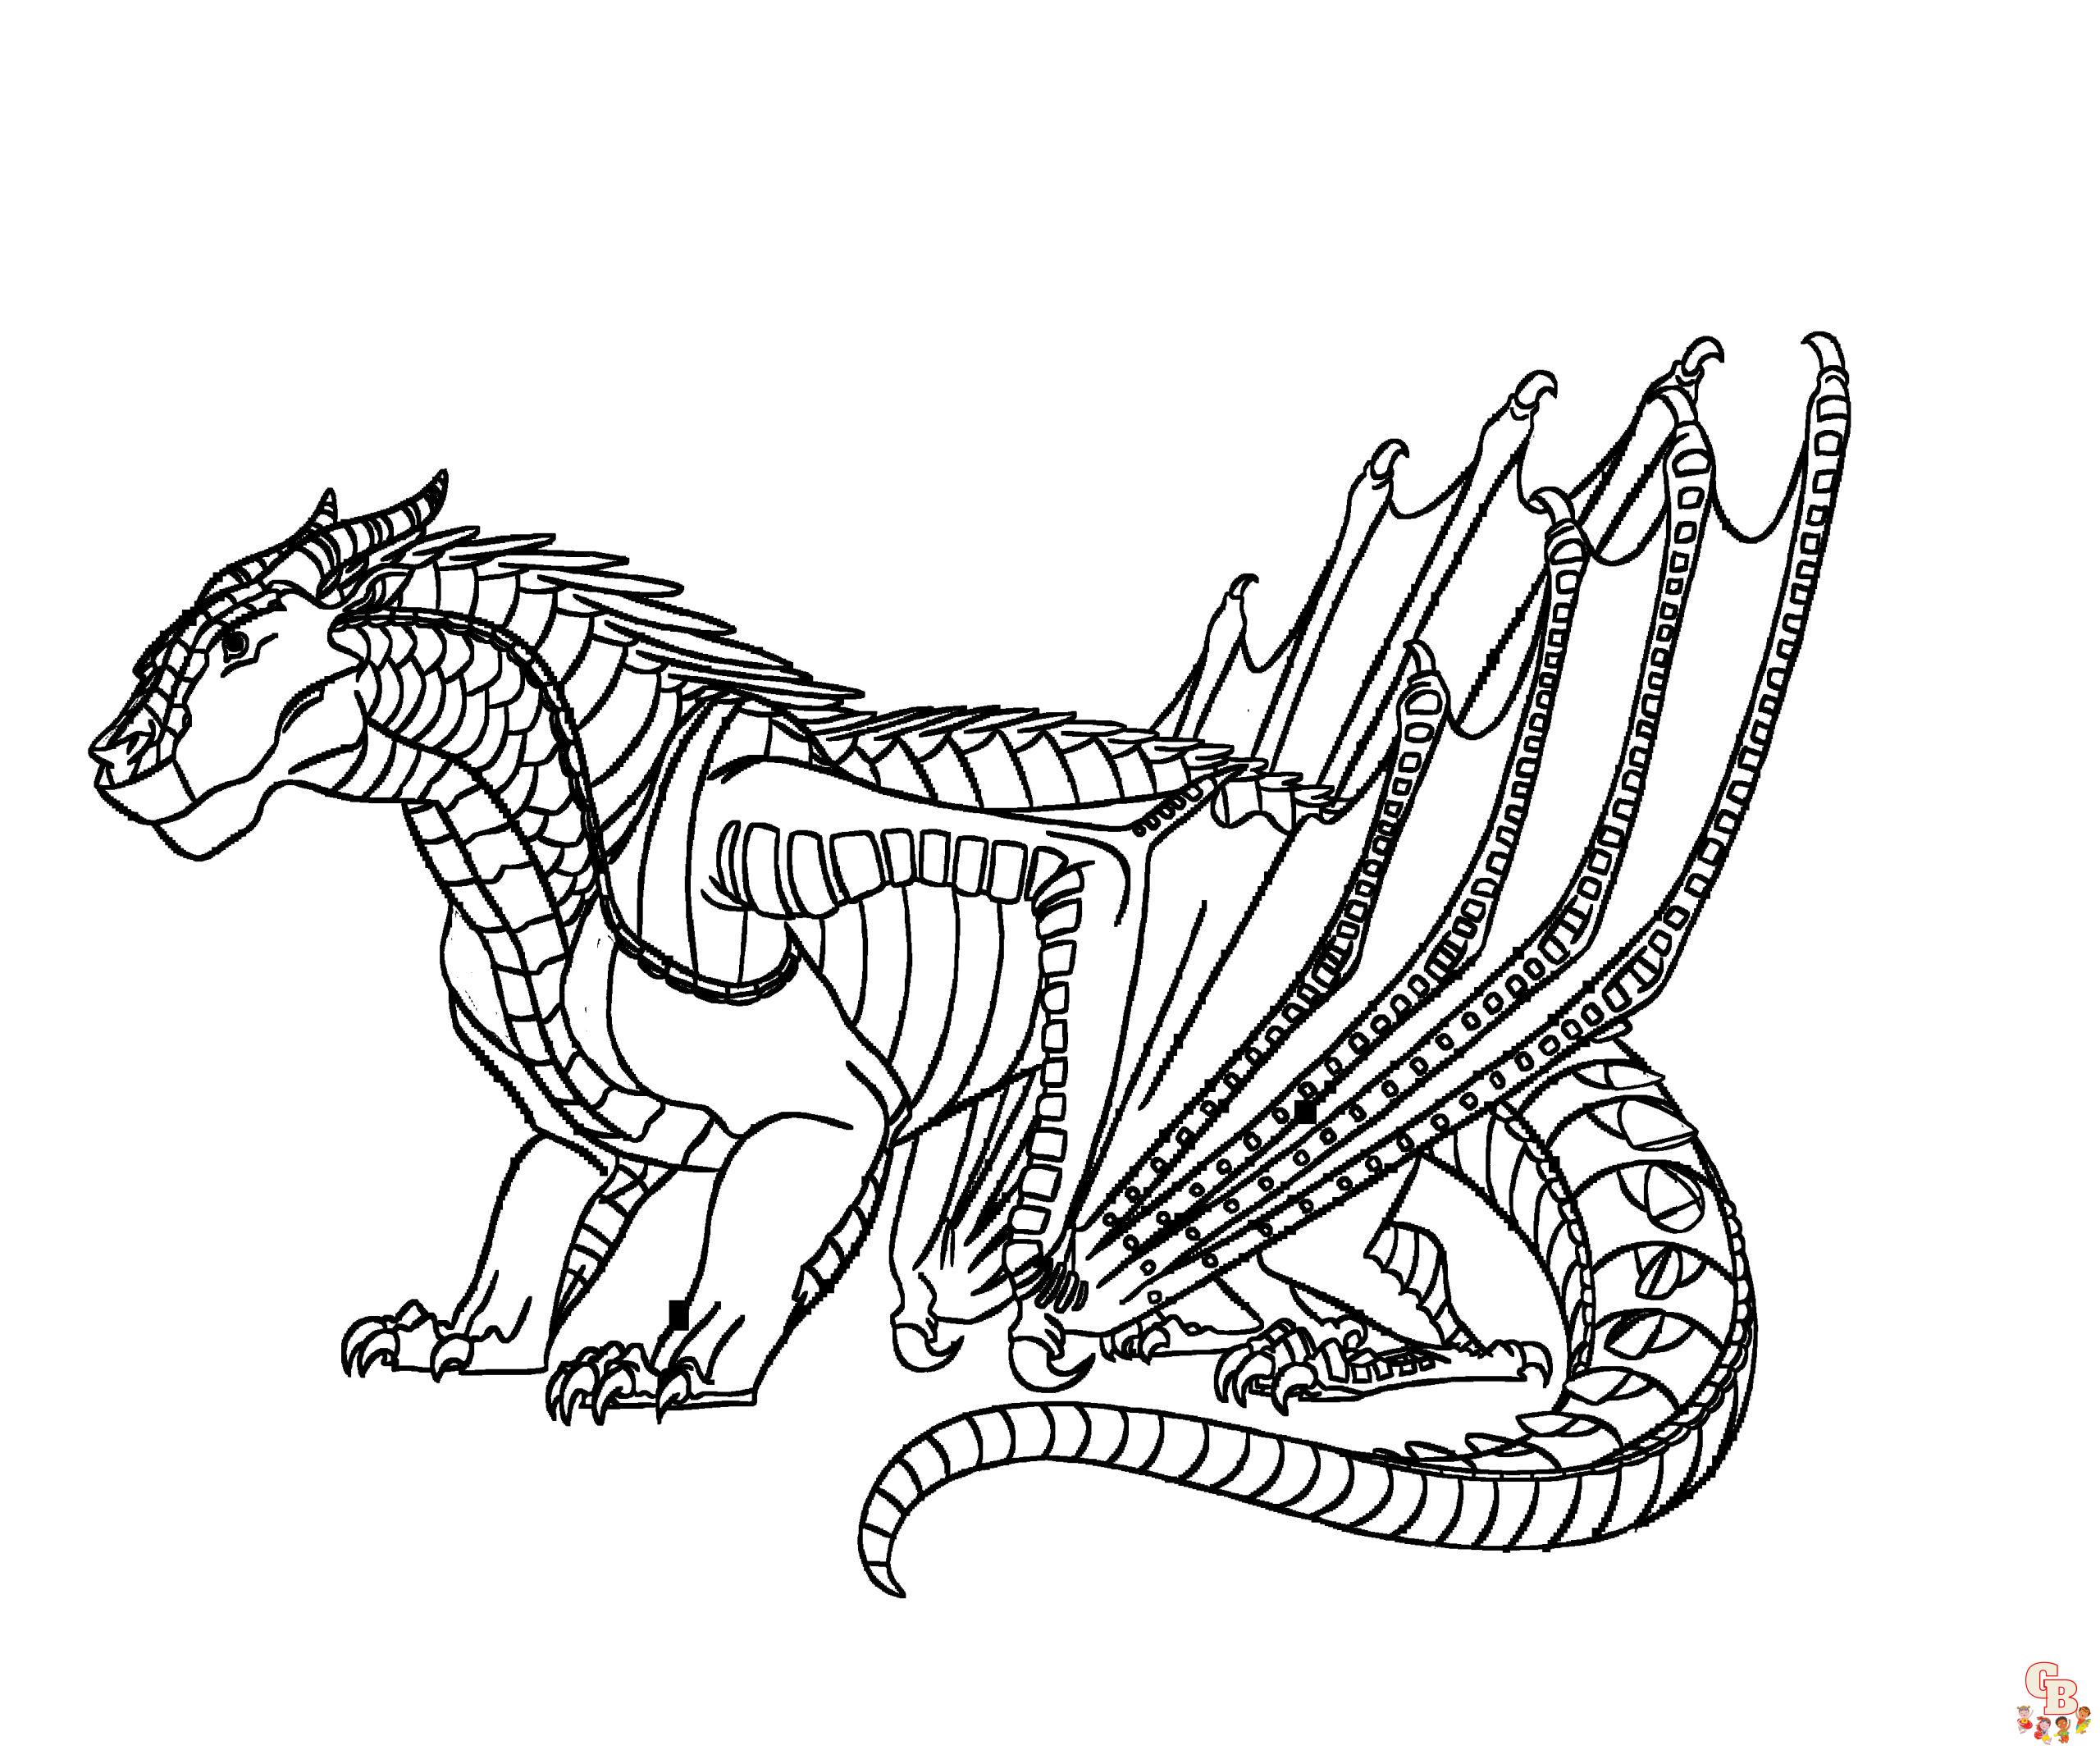 Wings of Fire coloring pages to print